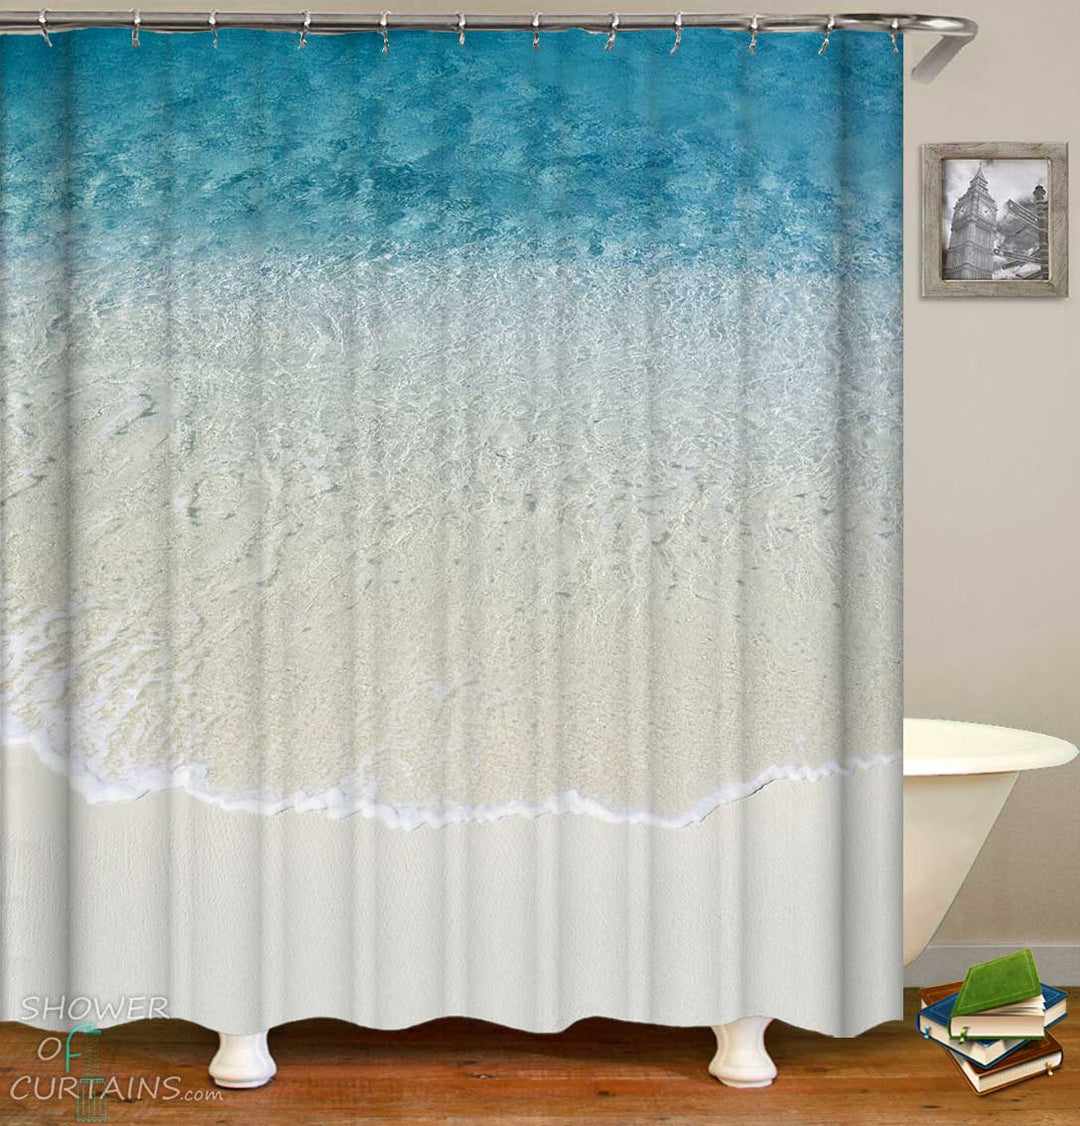 Shower Curtains with Clear Ocean and White Sand Beach